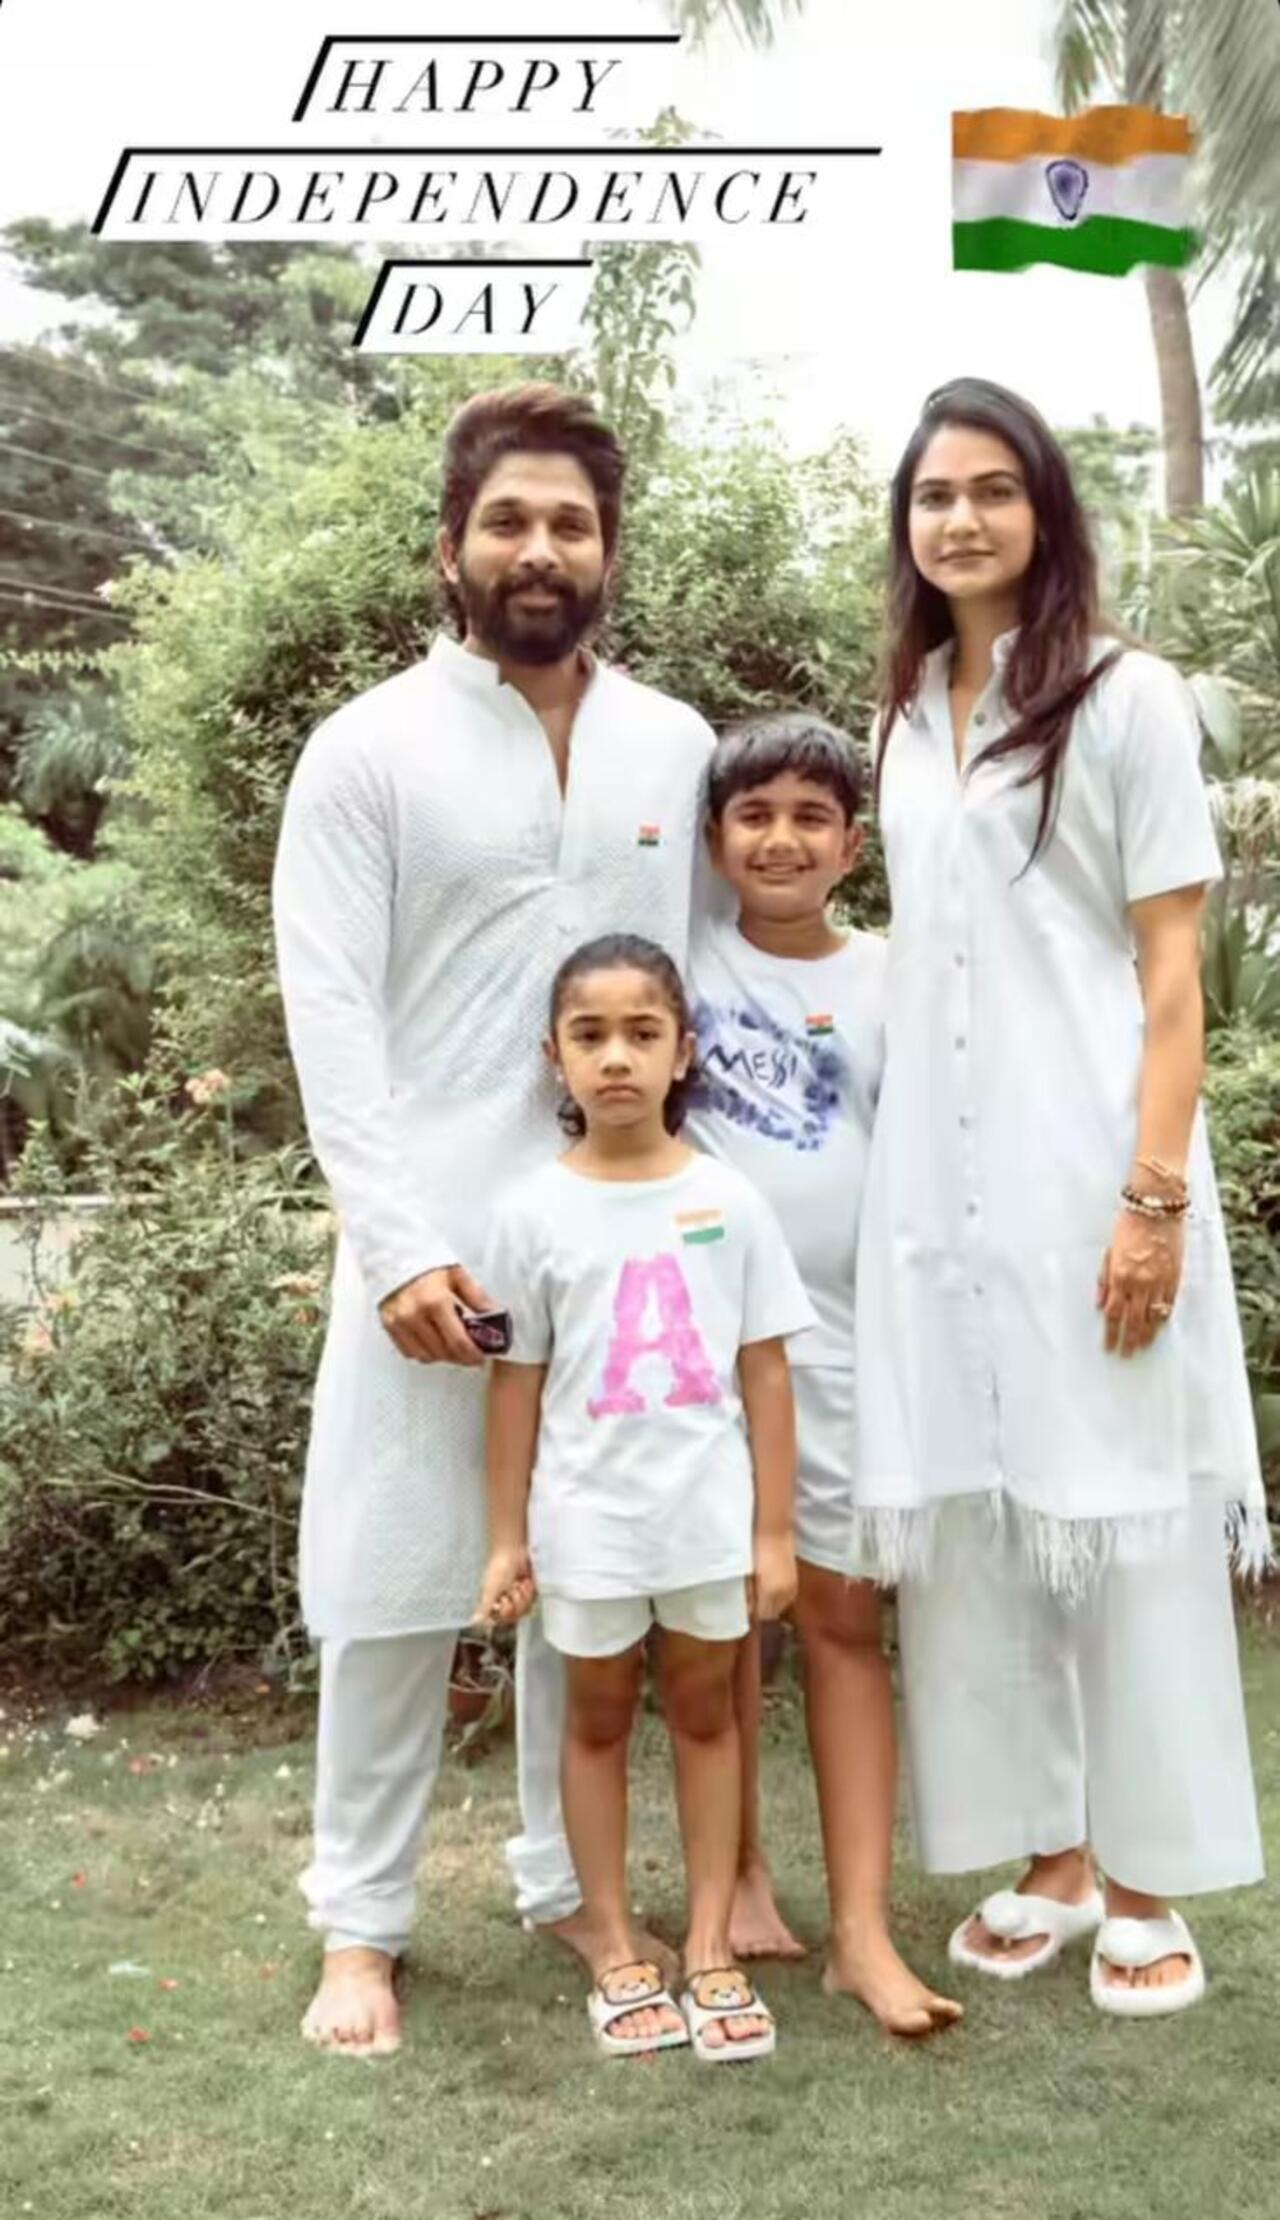 Allu Arjun shared a picture with his family